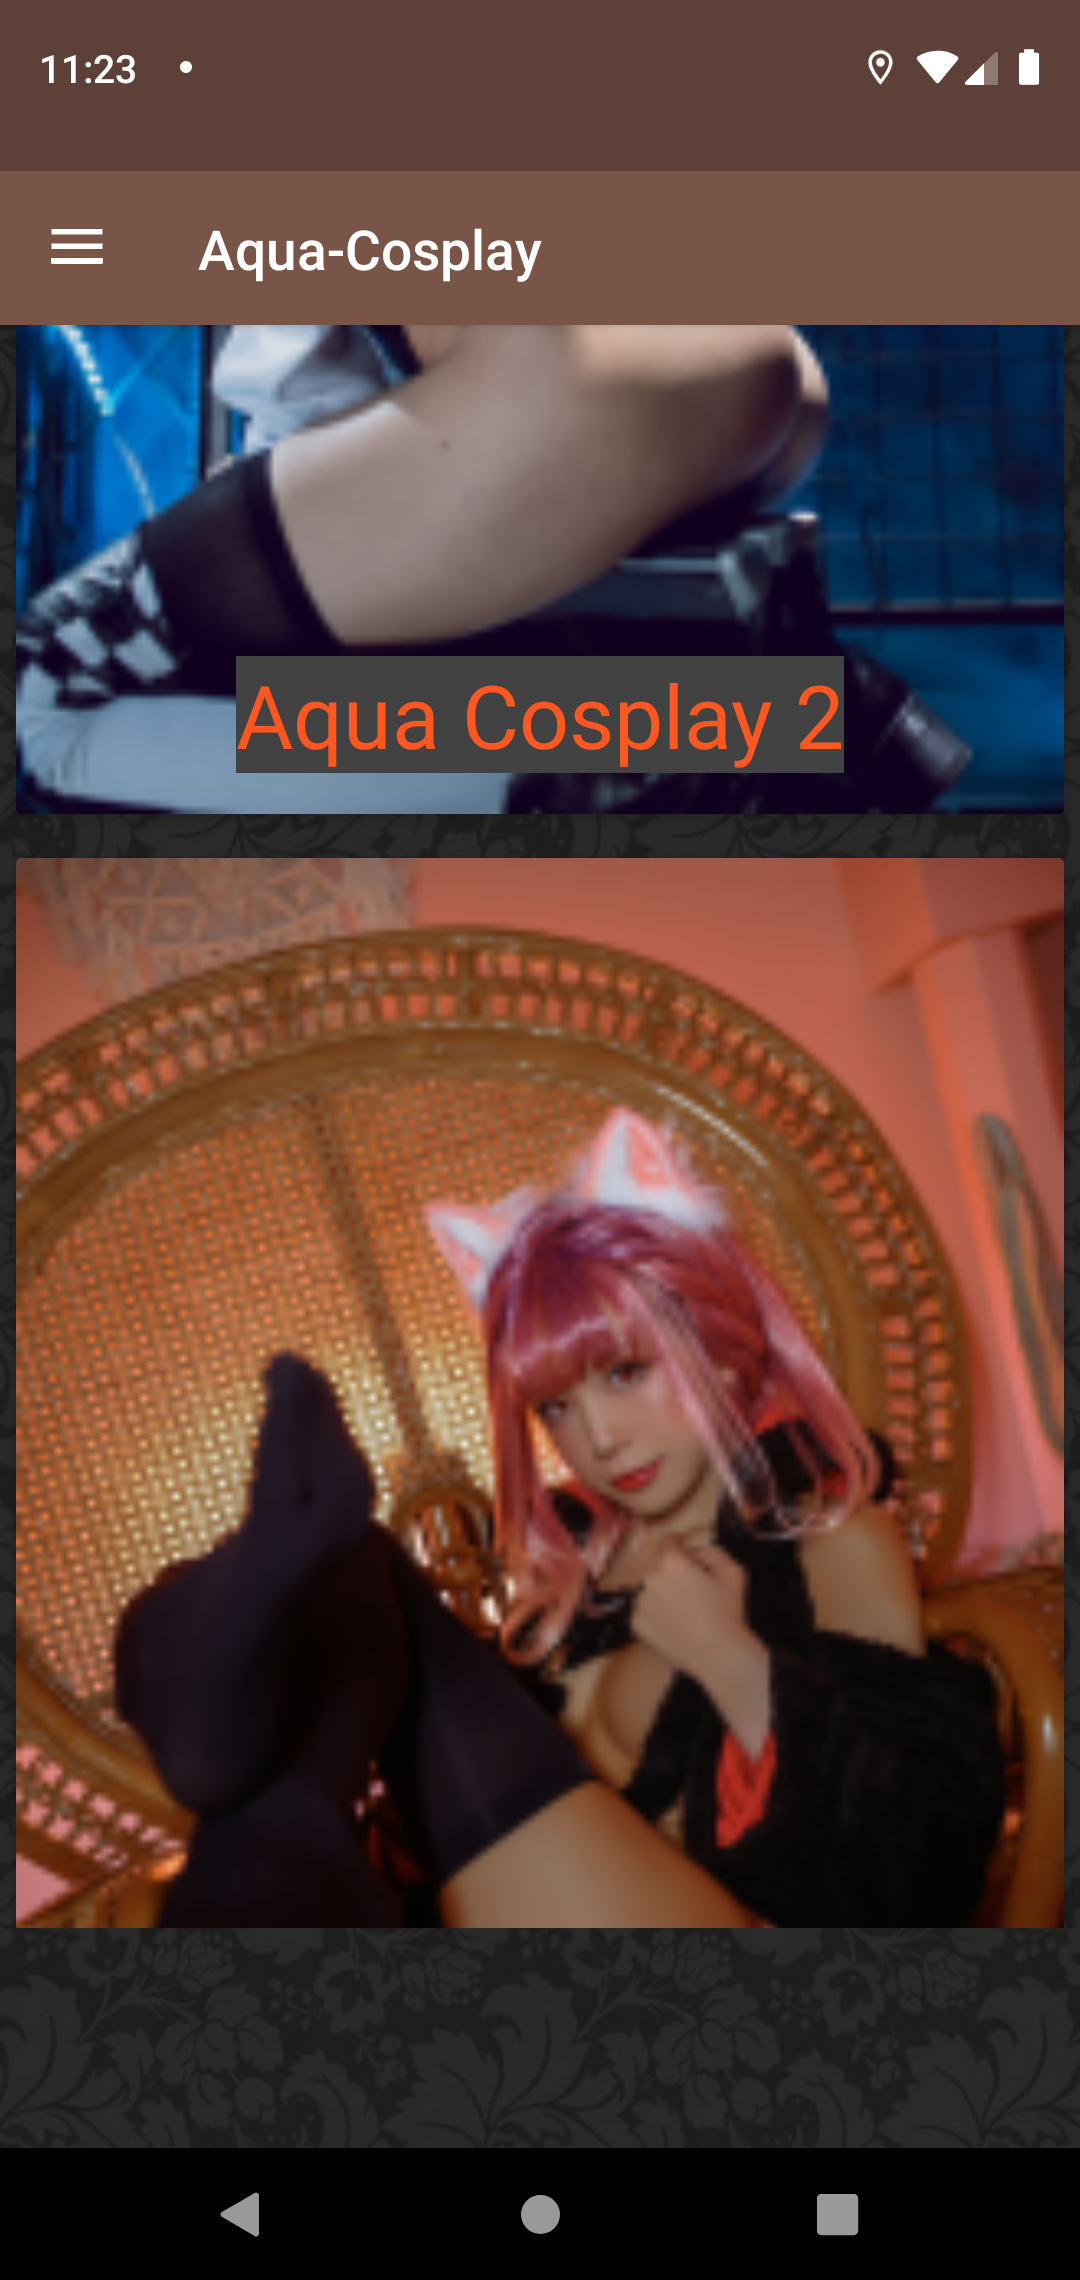 Aqua Cosplay pictures,images,download,picture,app,phone,image,gay,collection,finder,offline,best,ecchi,apk,pics,the,cosplay,baixar,gallery,apps,photos,pornstar,hentai